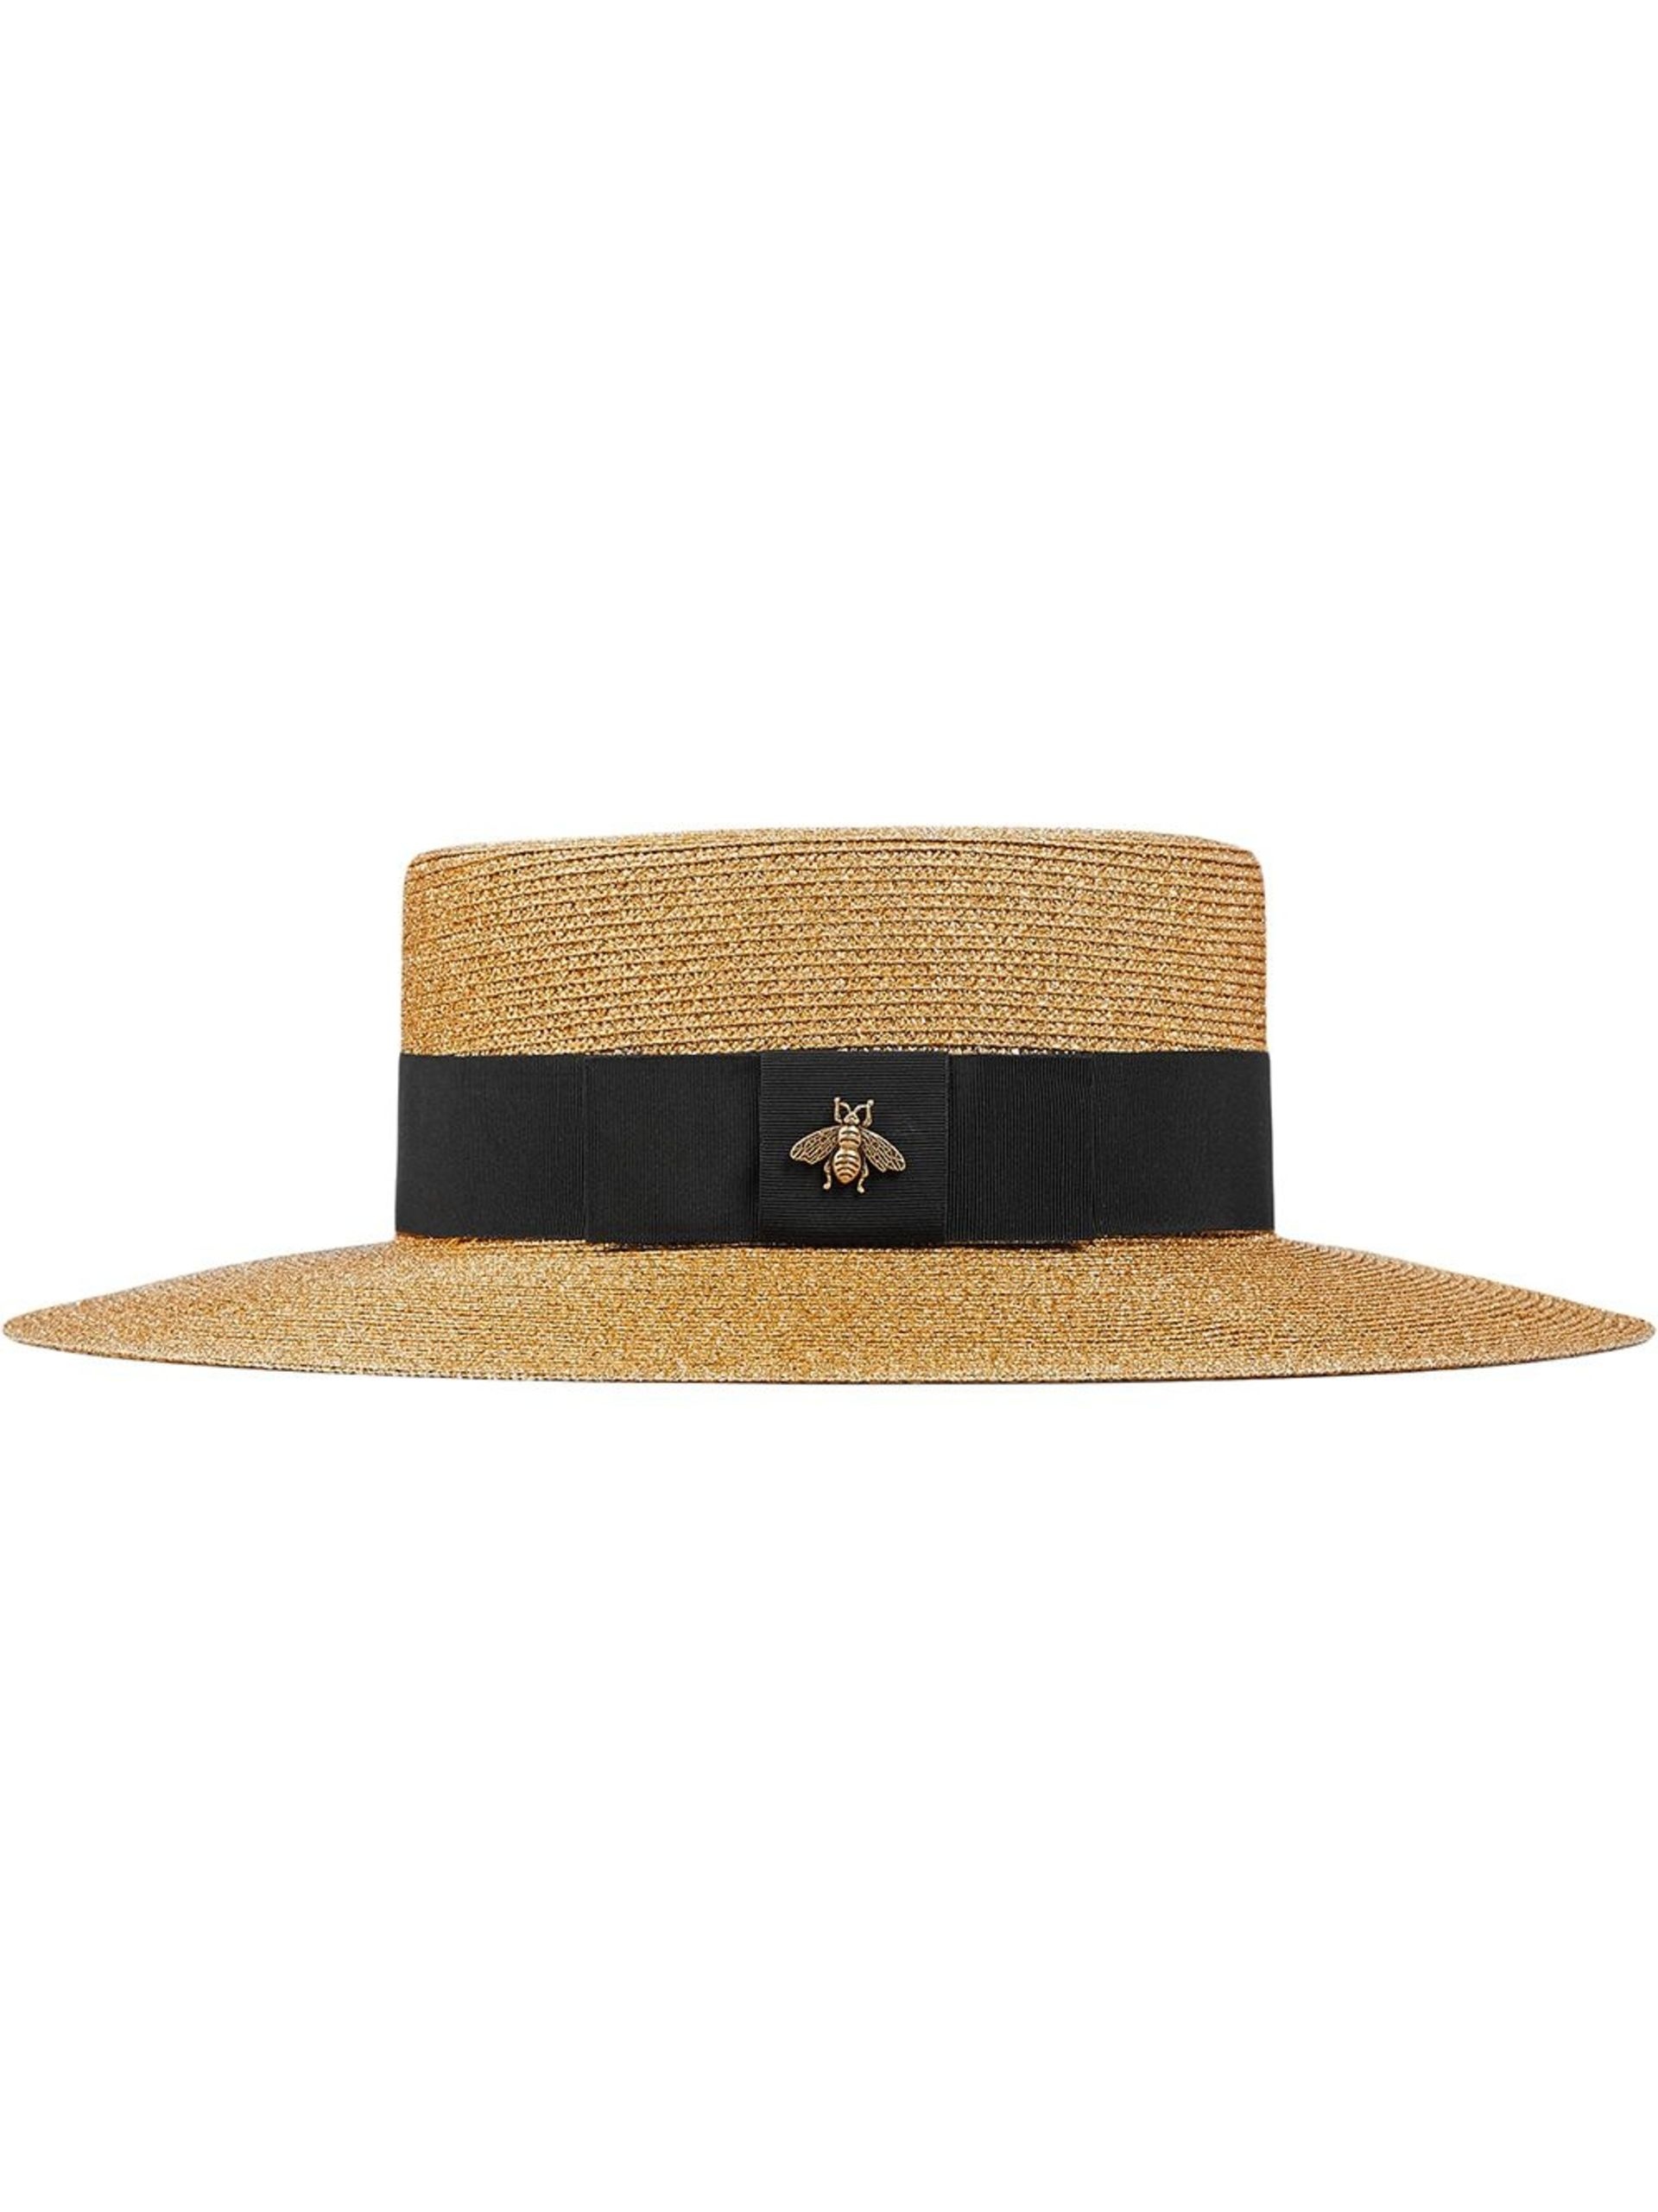 neutral straw boater hat - 1